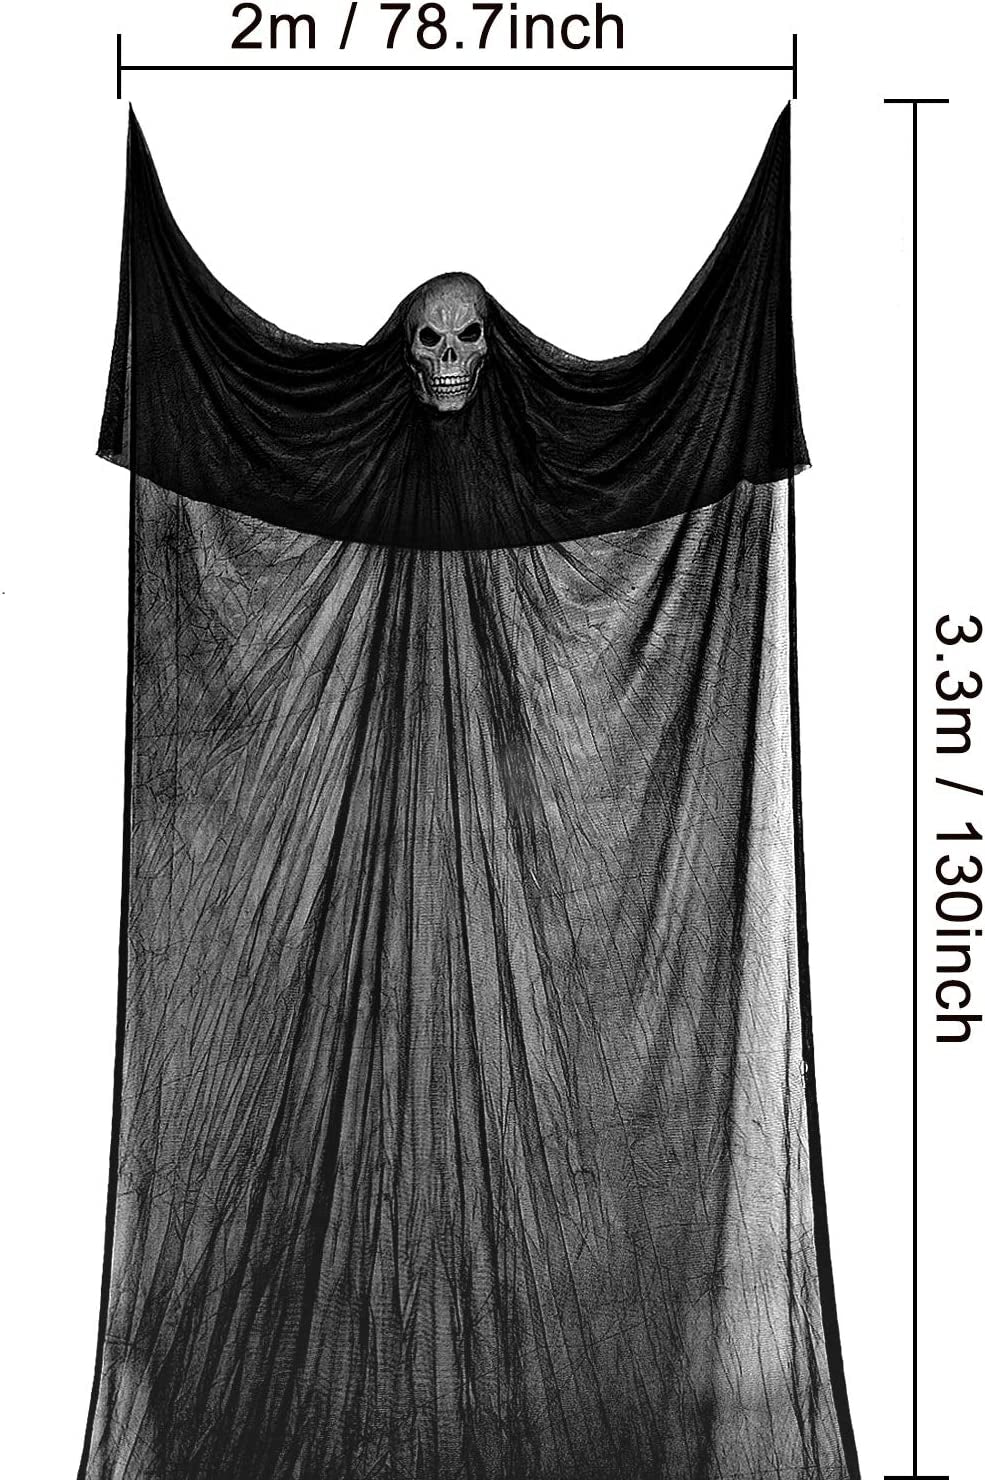 Halloween Hanging Ghost Decorations, Hanging Skeleton Ghost Scary Props for Home, Yard, Outdoor, Indoor, Party, Bar, Tree, Wall, Veranda, Porch, Eaves, Haunted House (Black)